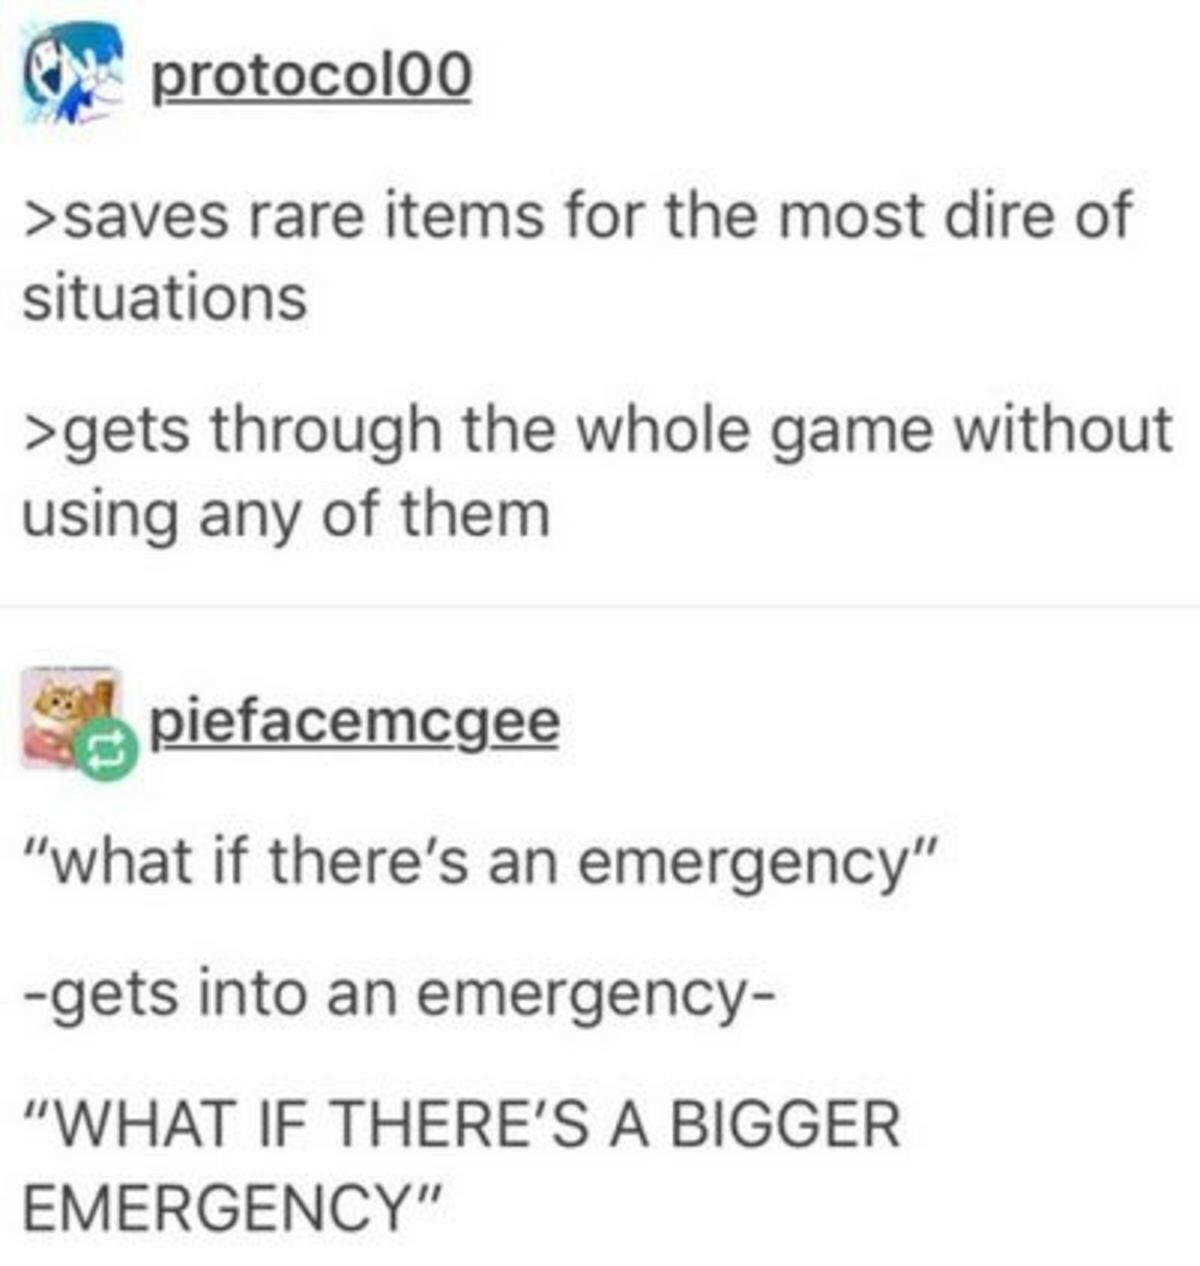 document - Con protocoloo >saves rare items for the most dire of situations >gets through the whole game without using any of them Spiefacemcgee "what if there's an emergency" gets into an emergency "What If There'S A Bigger Emergency"